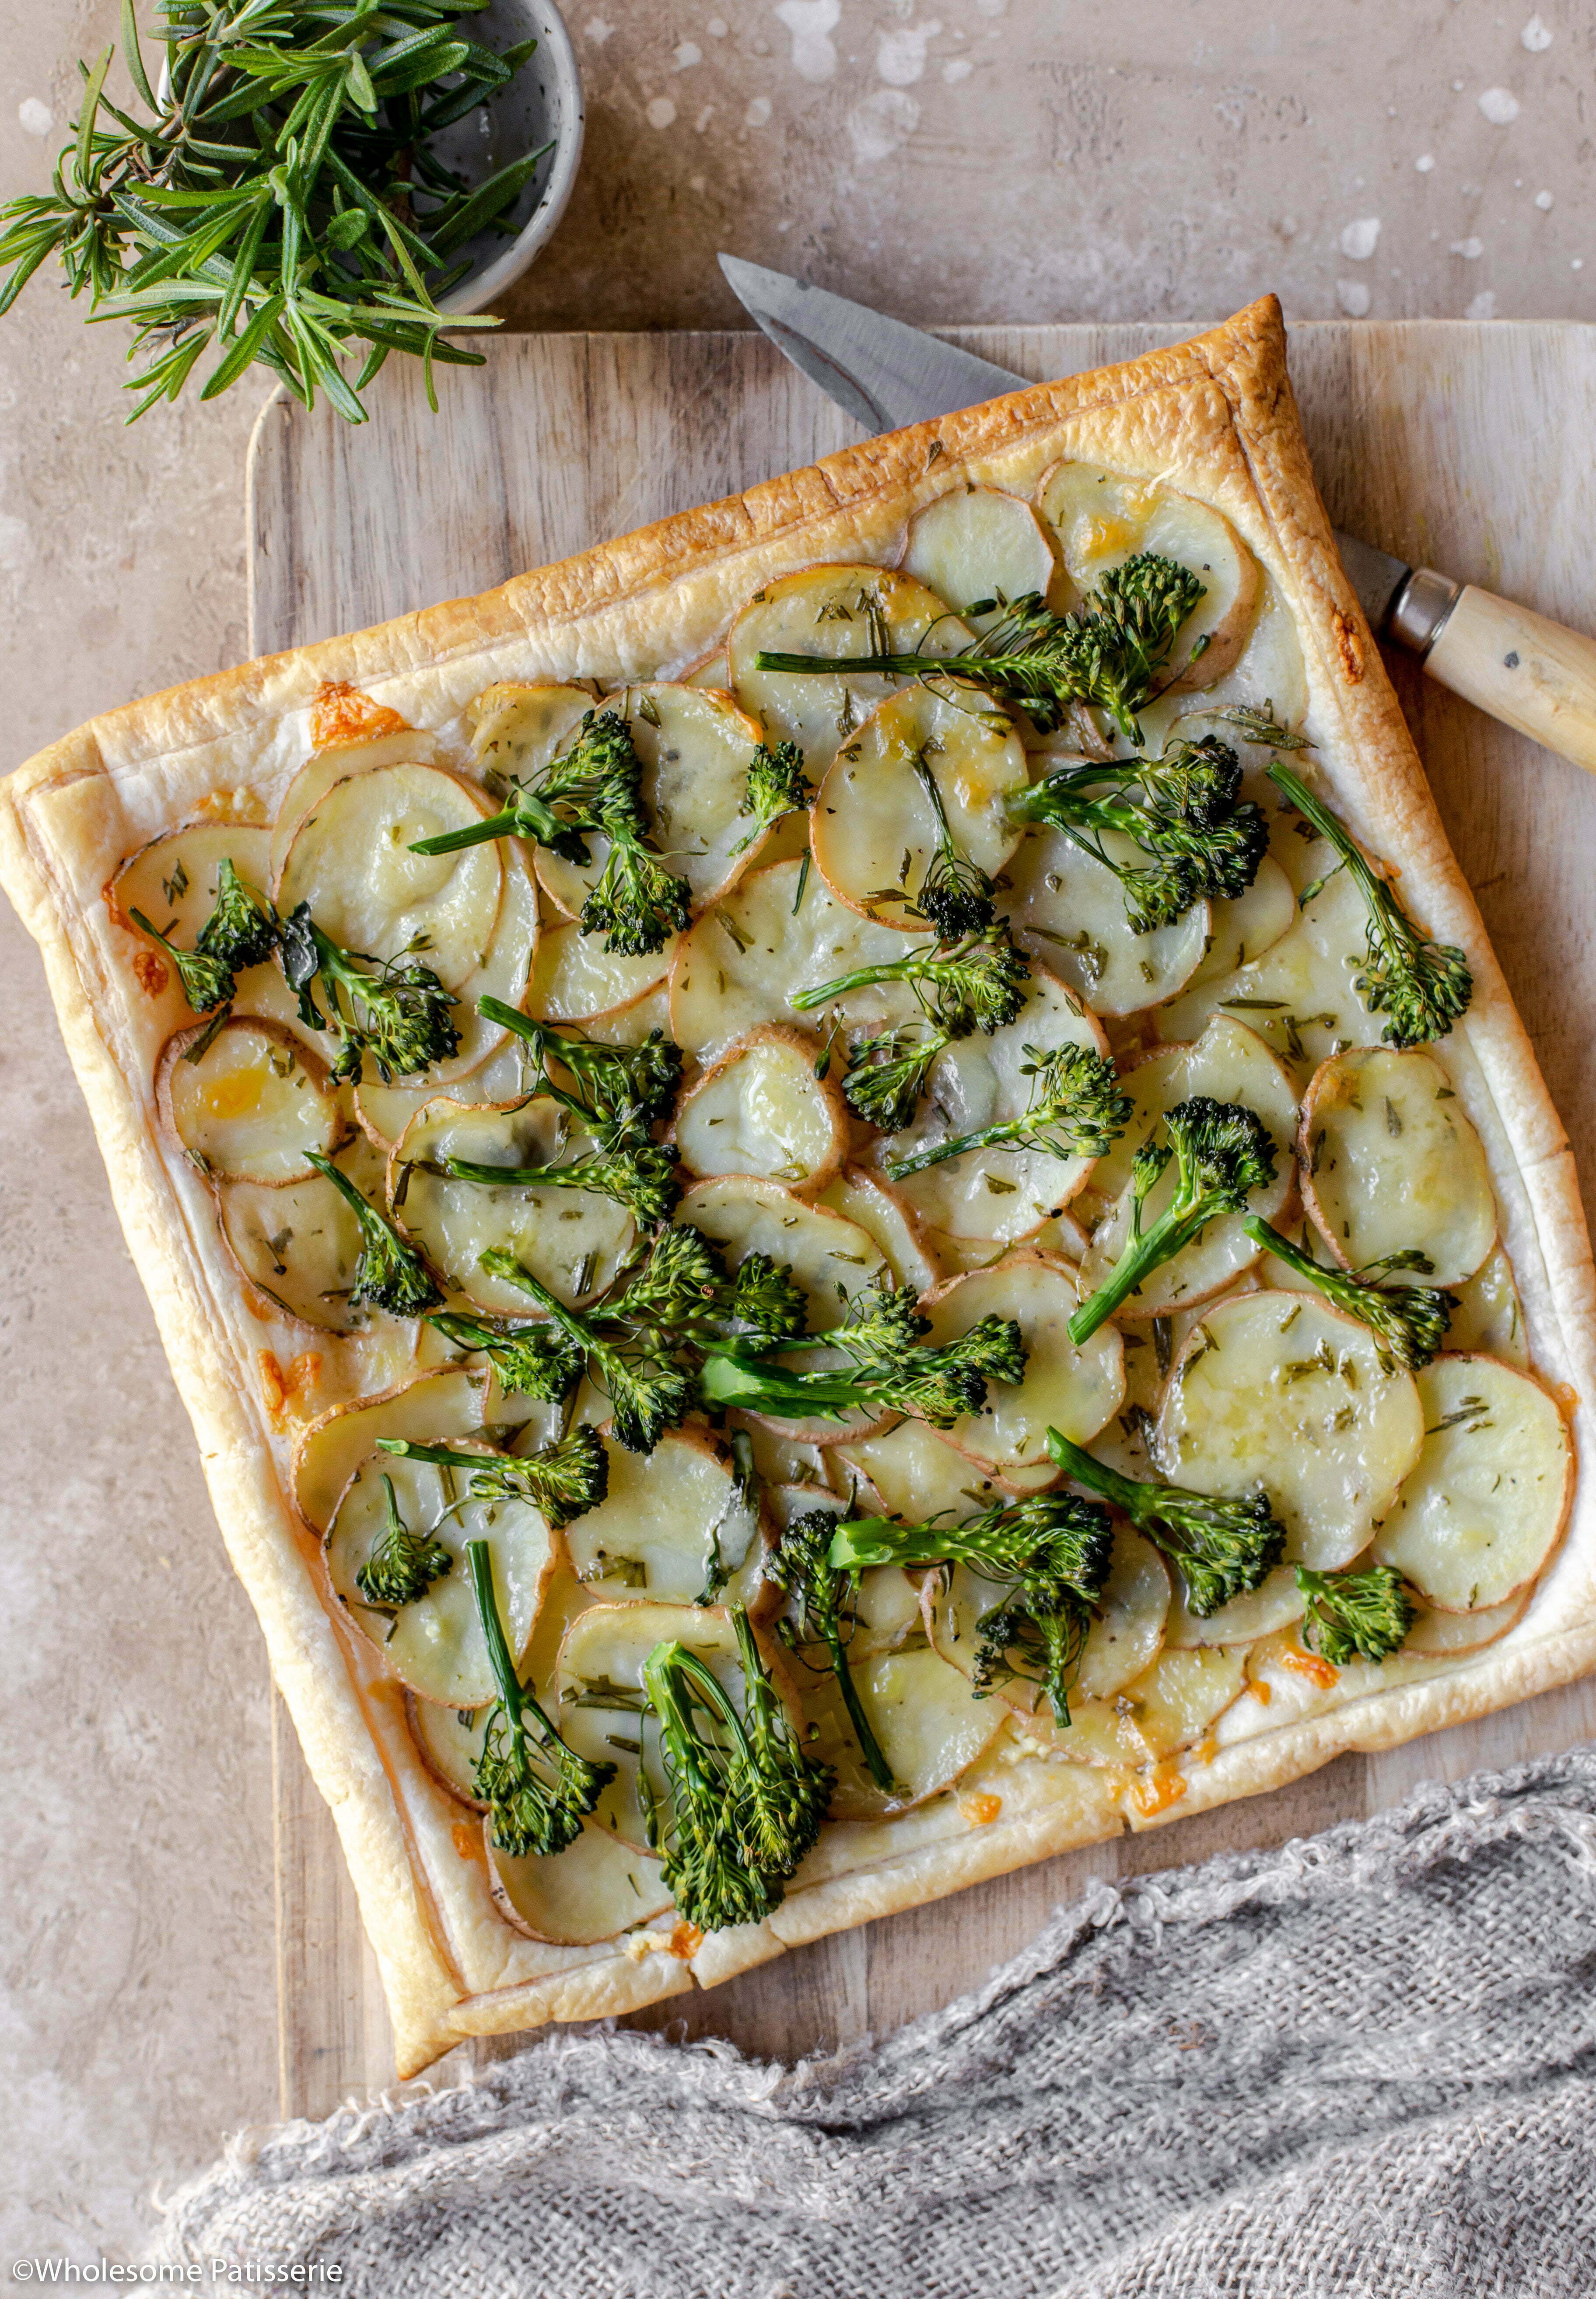 Crispy golden pastry tart filled with rosemary potatoes, extra sharp cheese, garlic and beautiful green broccolini!